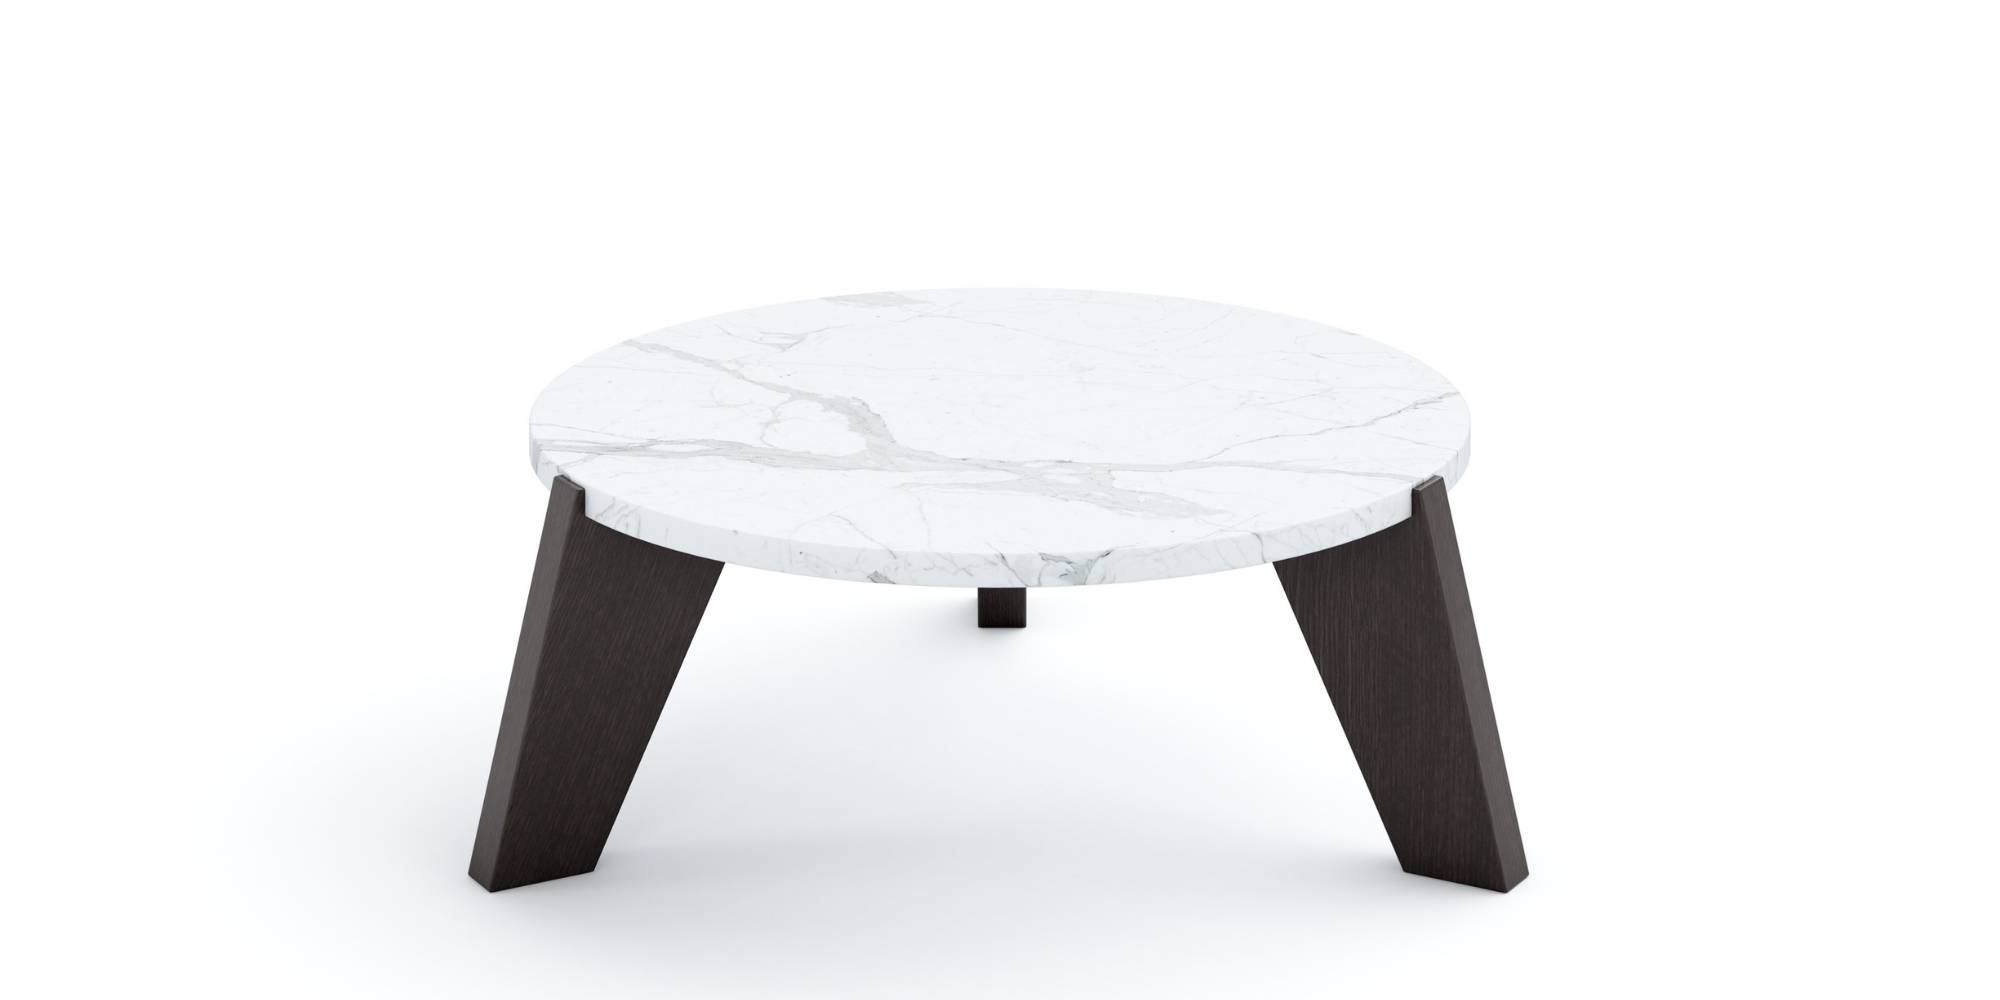 Lepus Square Side Table in Outdoor Tables Side Tables for Asteri Lusso collection